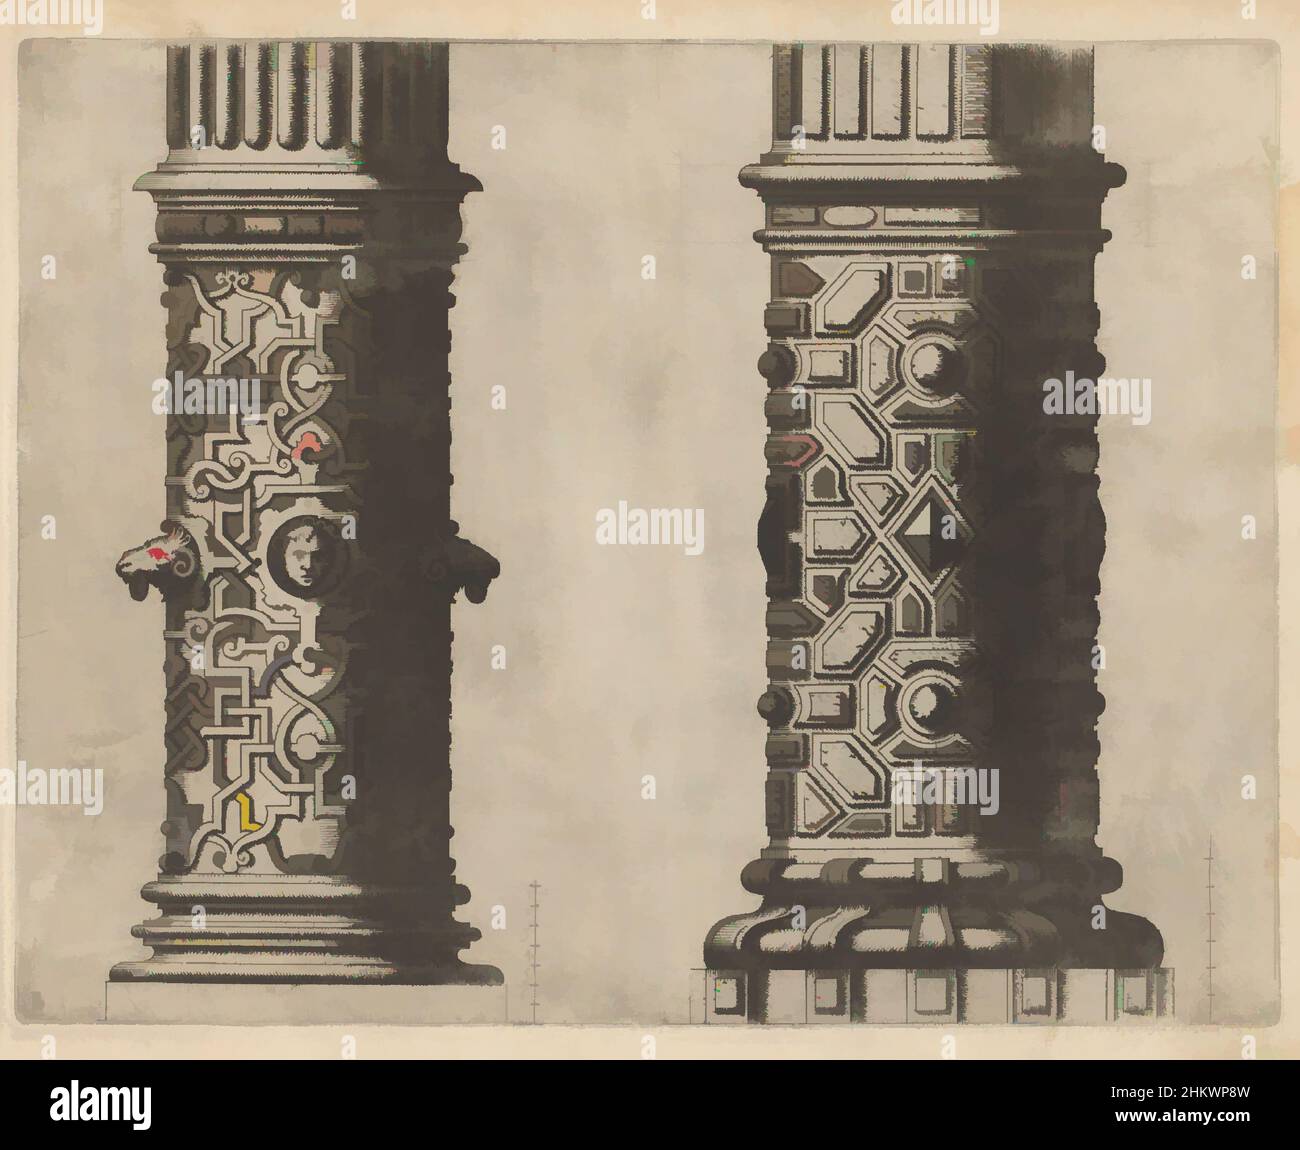 Art inspired by Two 'columnae caelatae', Den eersten boeck ghemaeckt op de twee Colomnen Dorica en Ionica (series title), Two 'columnae caelatae'. On the left the lower part of a column of the Ionic Order with moresques and mascarons. On the right the lower part of a column of the Doric, Classic works modernized by Artotop with a splash of modernity. Shapes, color and value, eye-catching visual impact on art. Emotions through freedom of artworks in a contemporary way. A timeless message pursuing a wildly creative new direction. Artists turning to the digital medium and creating the Artotop NFT Stock Photo